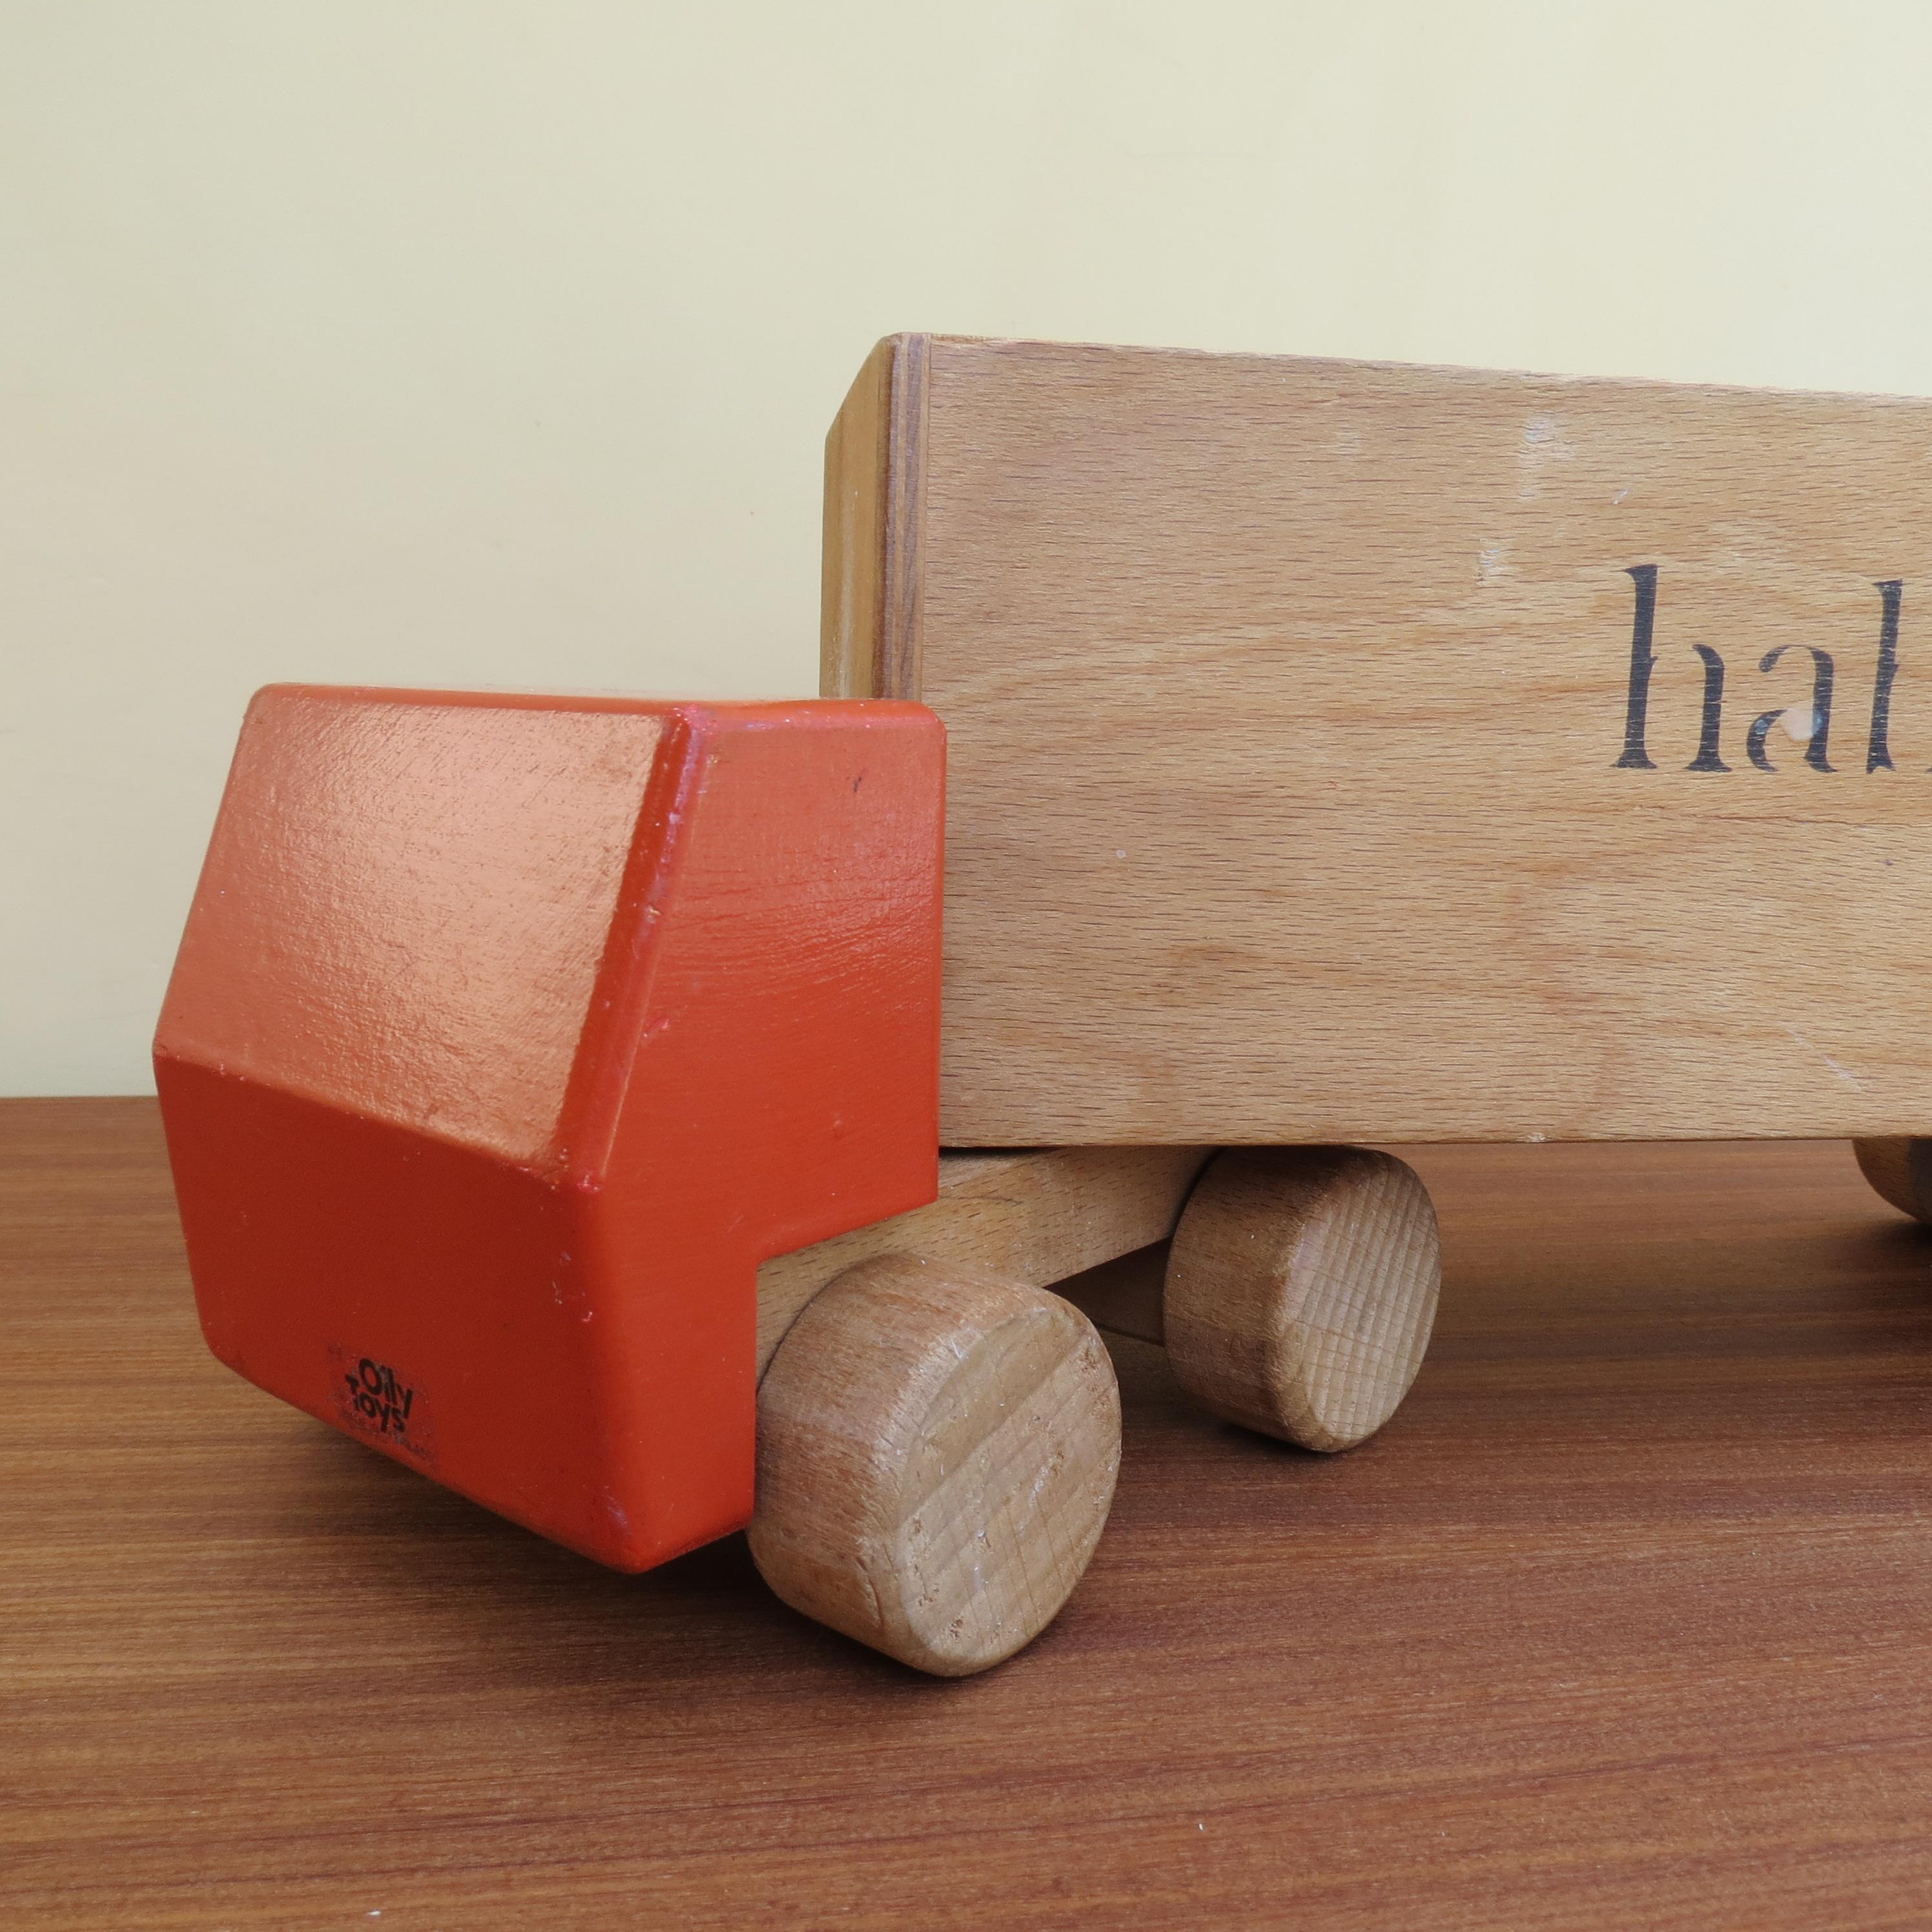 English 1970s Vintage Advertising Toy Lorry for Habitat Wooden Toy Lorry by Ryk Heuff